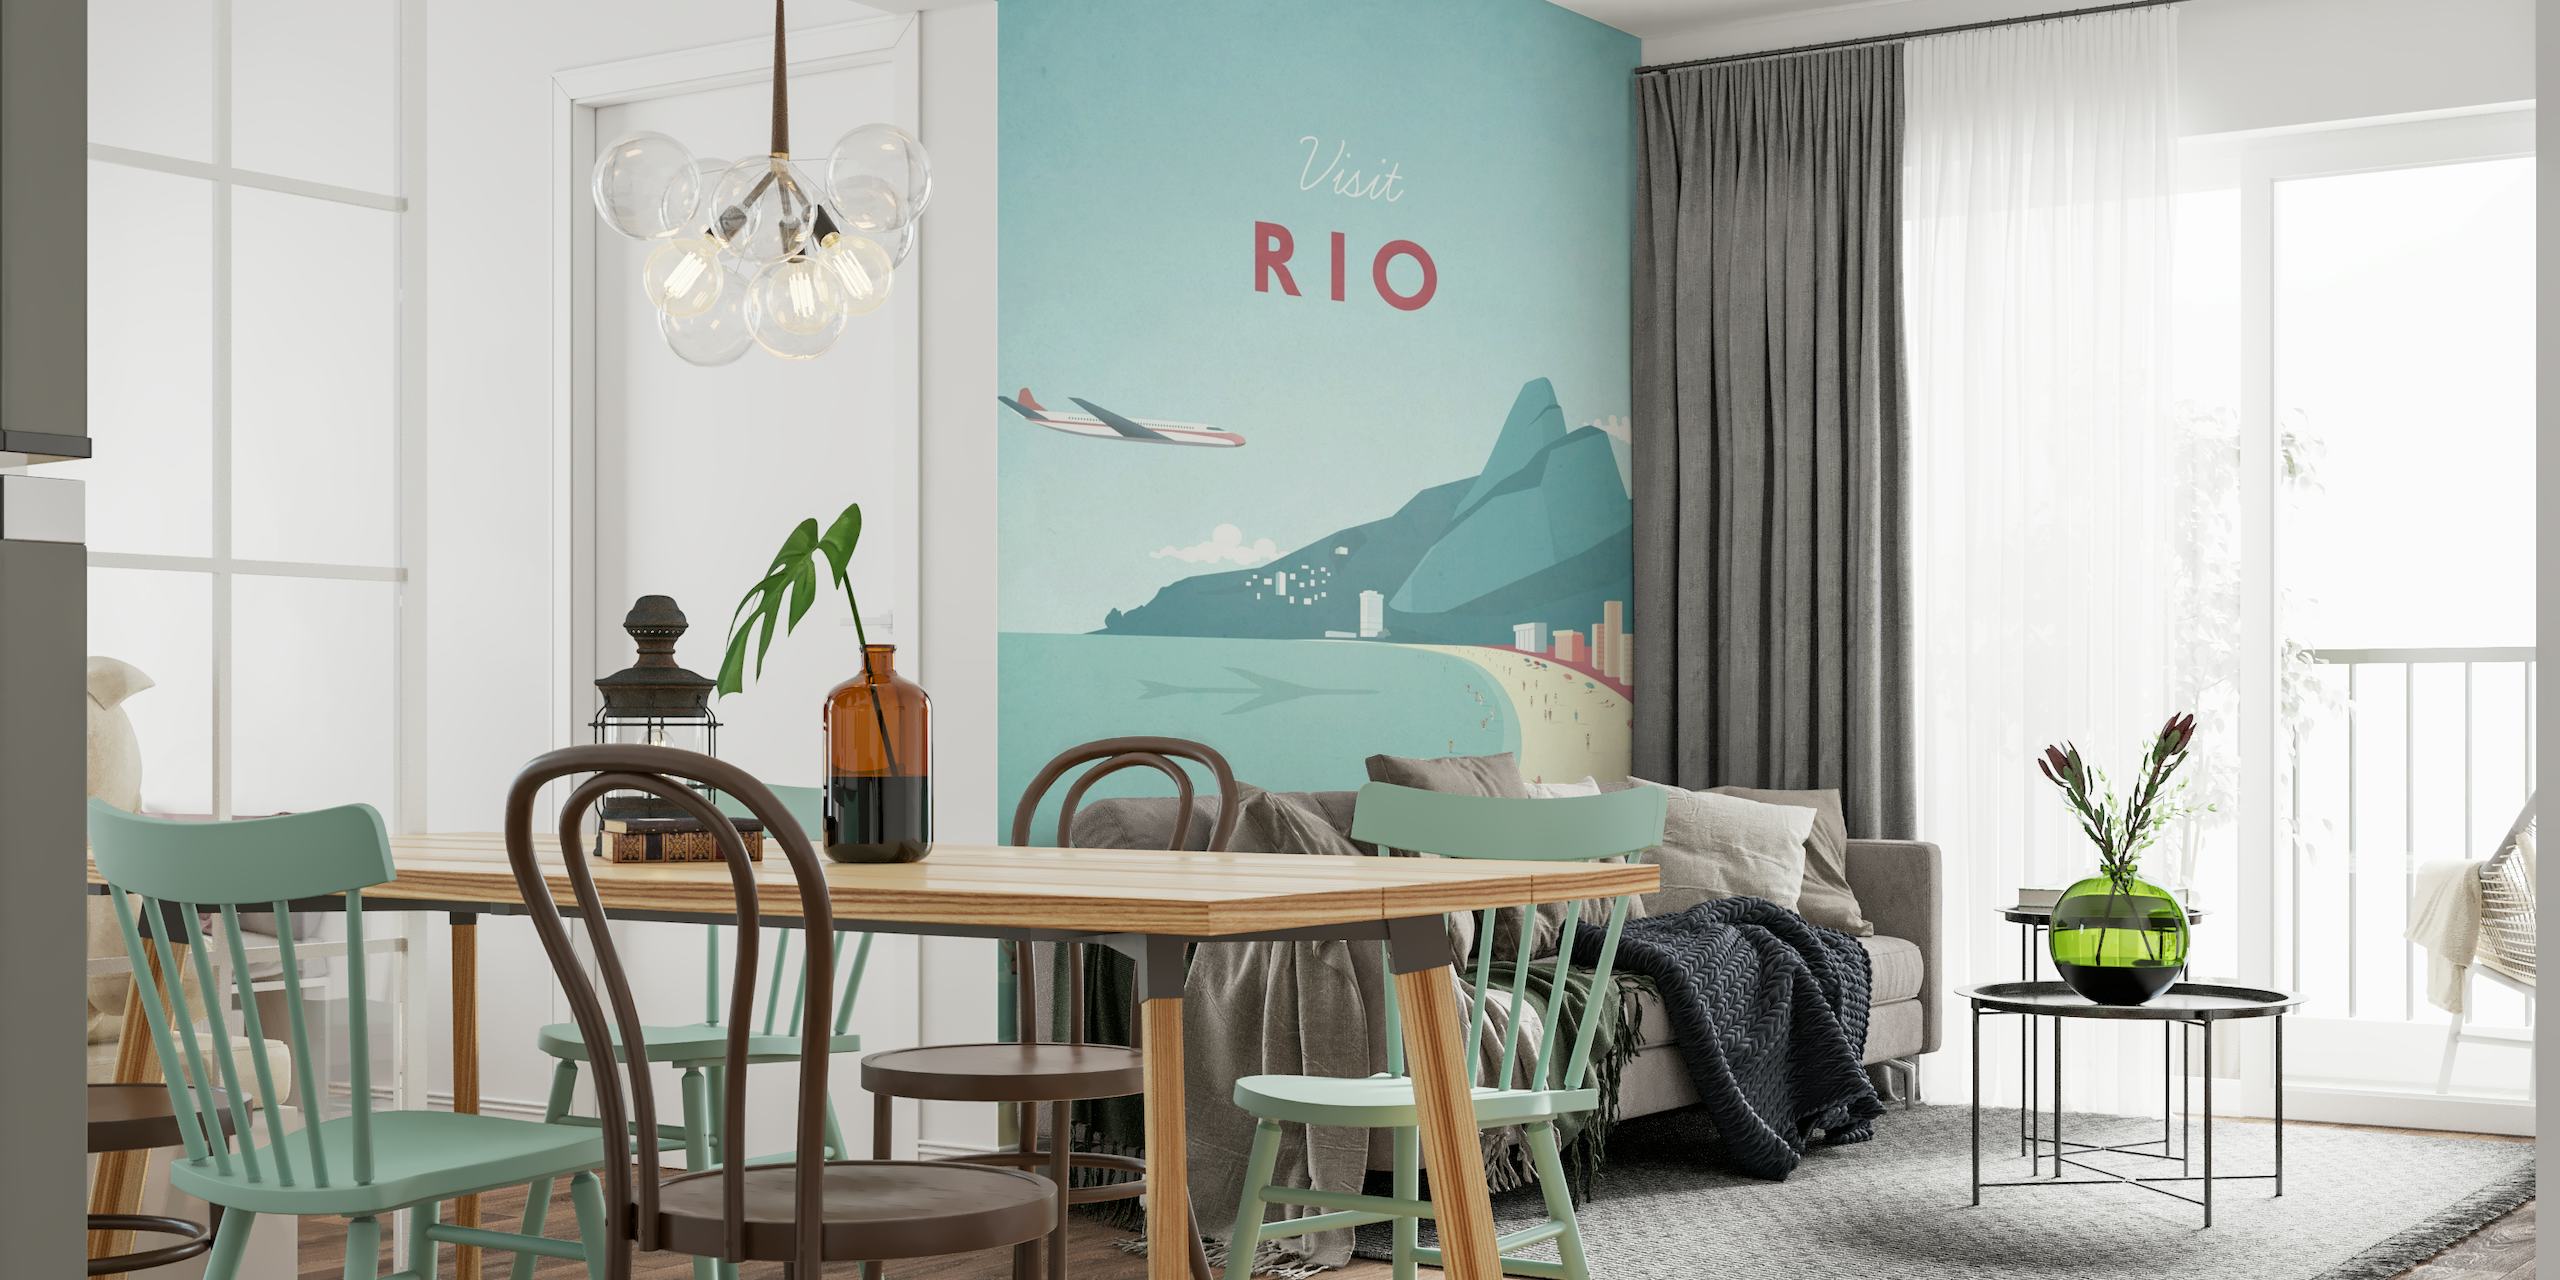 Stylized vintage travel poster wall mural with 'Visit Rio' text, featuring Rio de Janeiro's beach, mountain, and cityscape